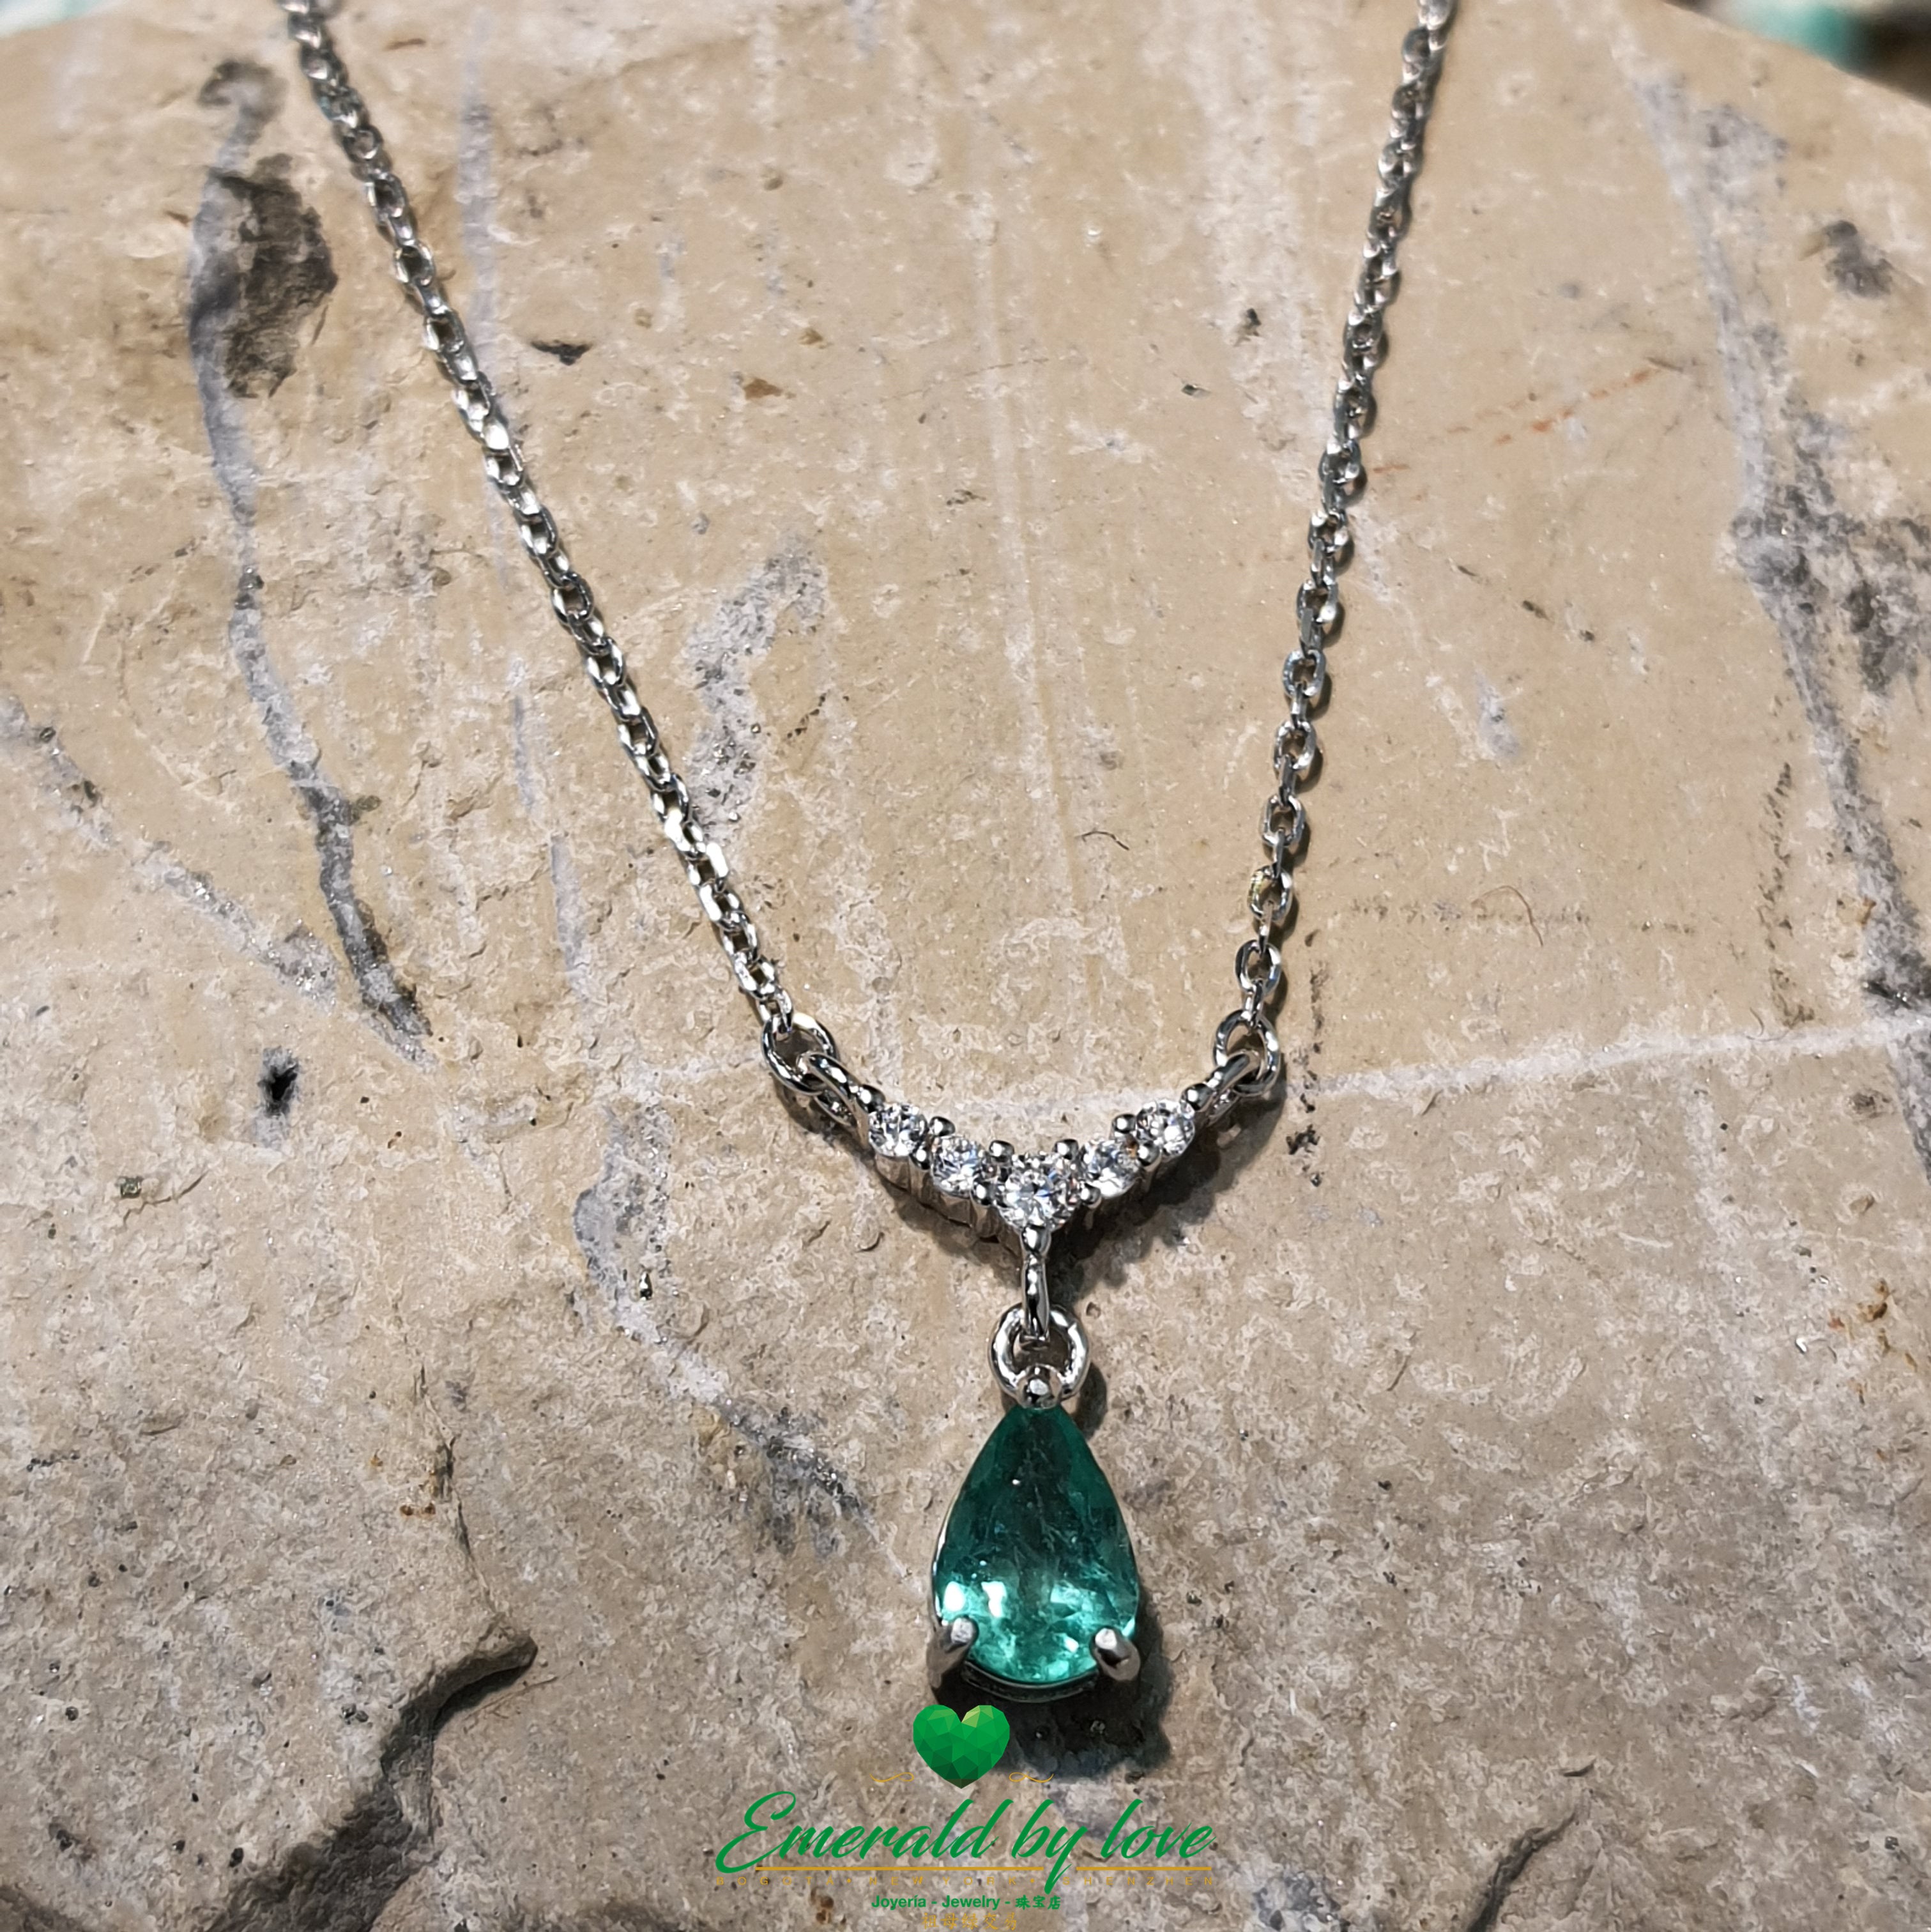 Silver Pendant with Tear-Shaped Crystal Emerald and Cubic Zirconia Accent